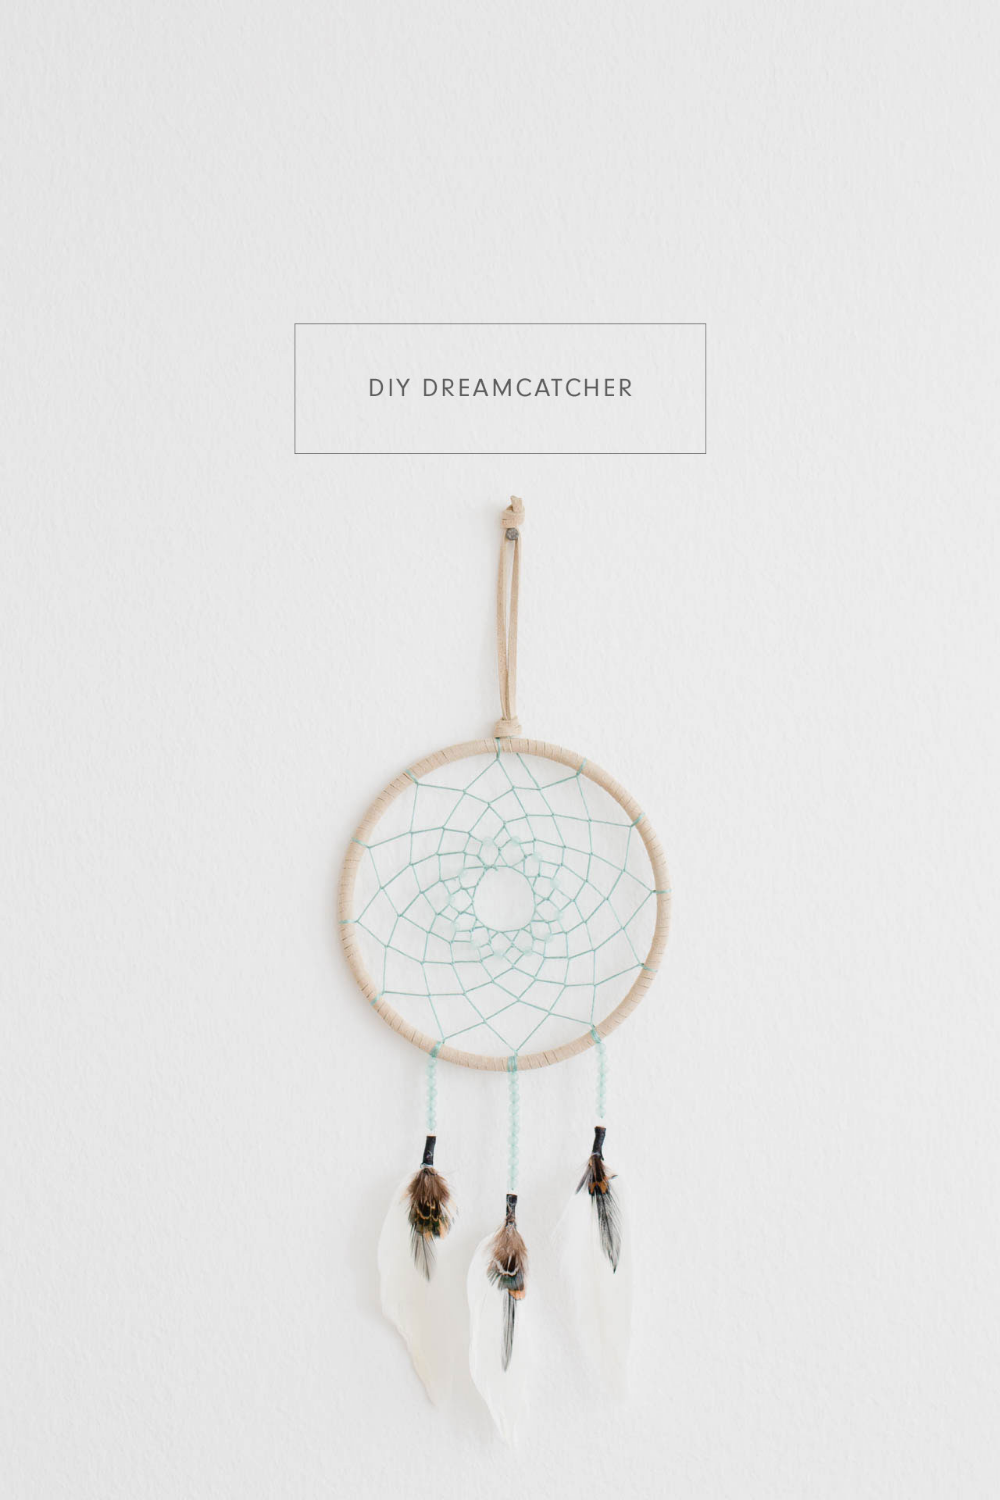 How to Make a Simple DIY Dreamcatcher - How to Make a Simple DIY Dreamcatcher -   18 diy Dream Catcher materials ideas